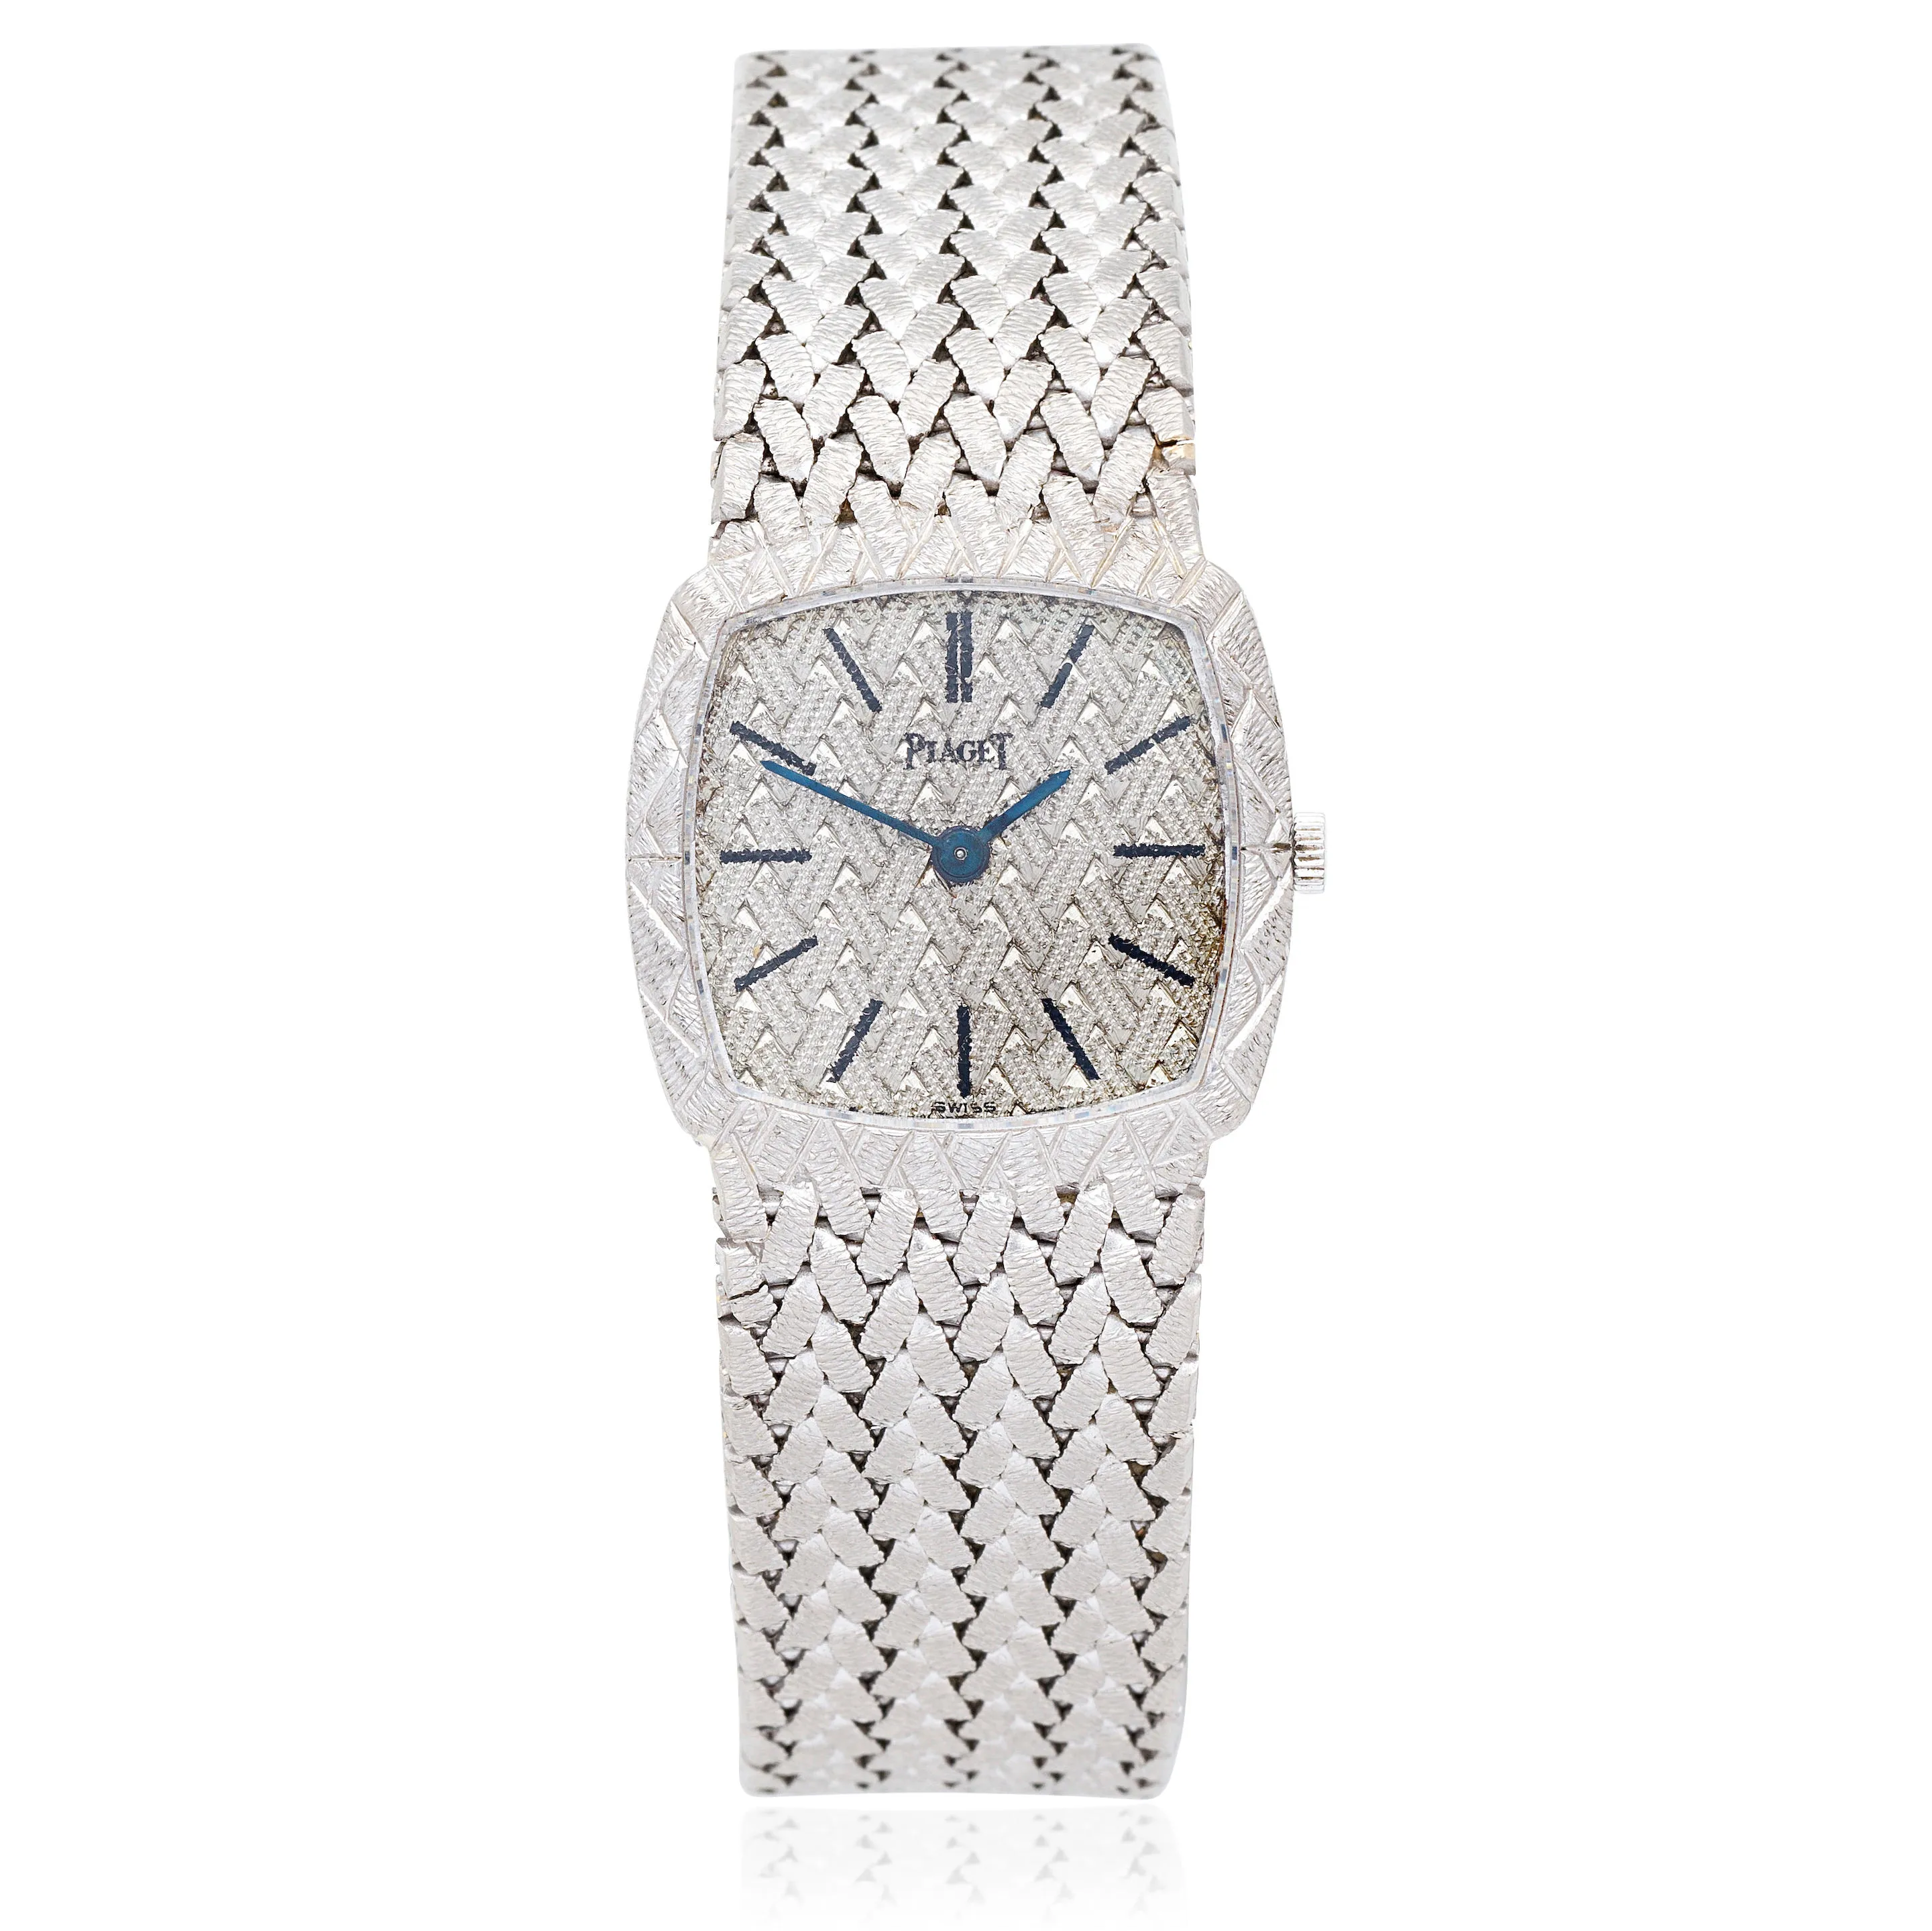 Piaget 9231 P5 23mm White gold Silver